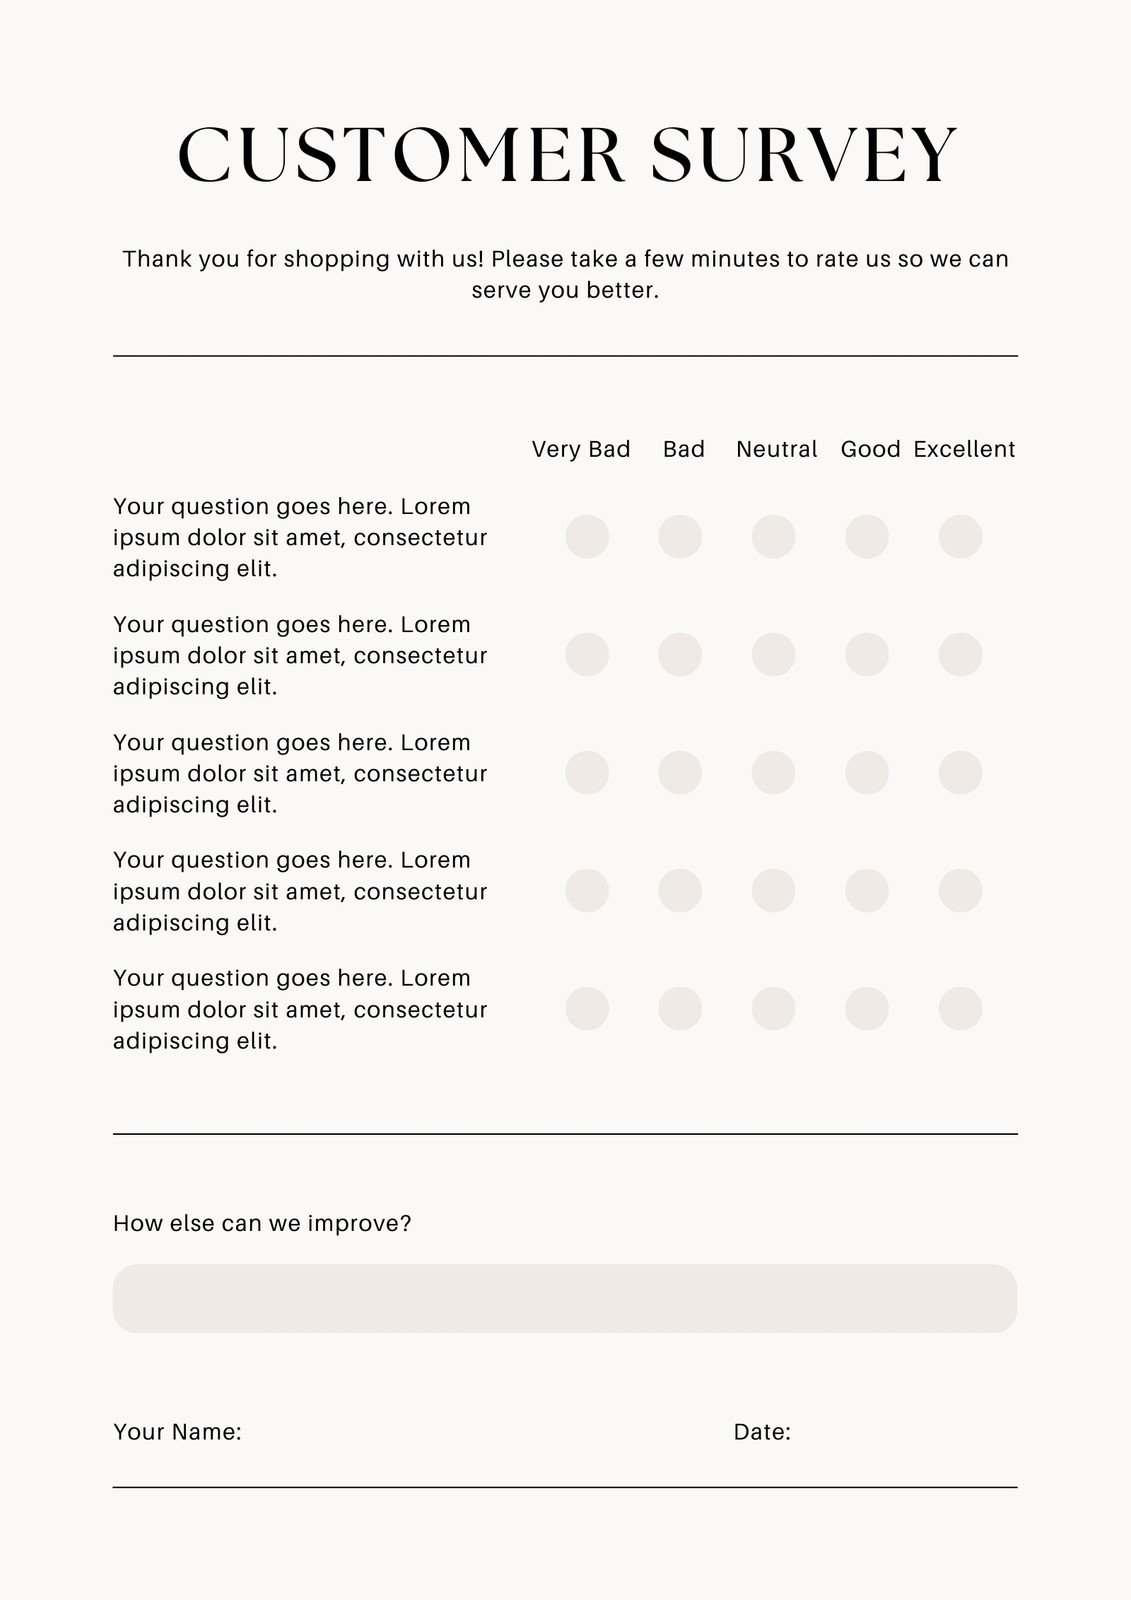 Formatting of the survey link